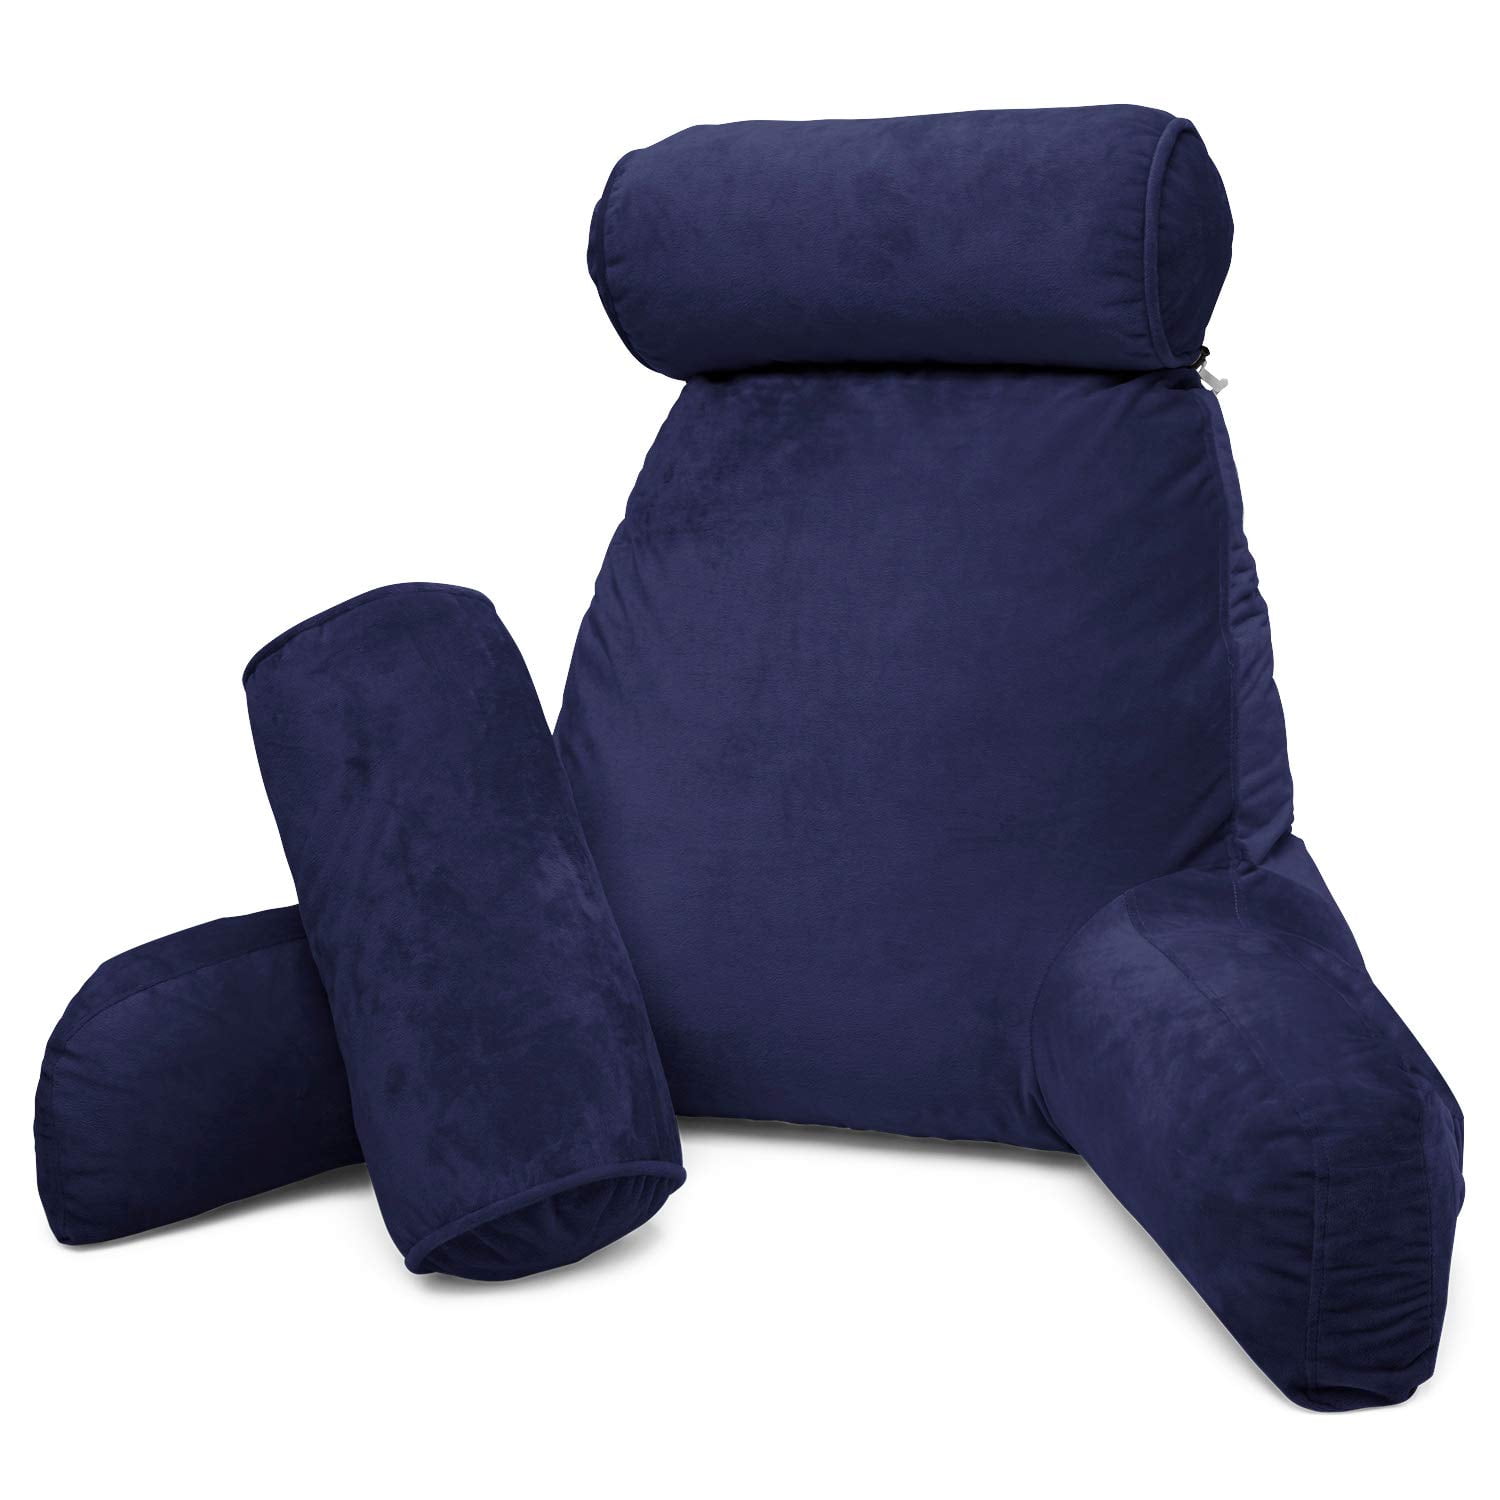 Pillow Dark Blue Big Backrest Reading Bed Rest Pillow with Arms Remove Neck 